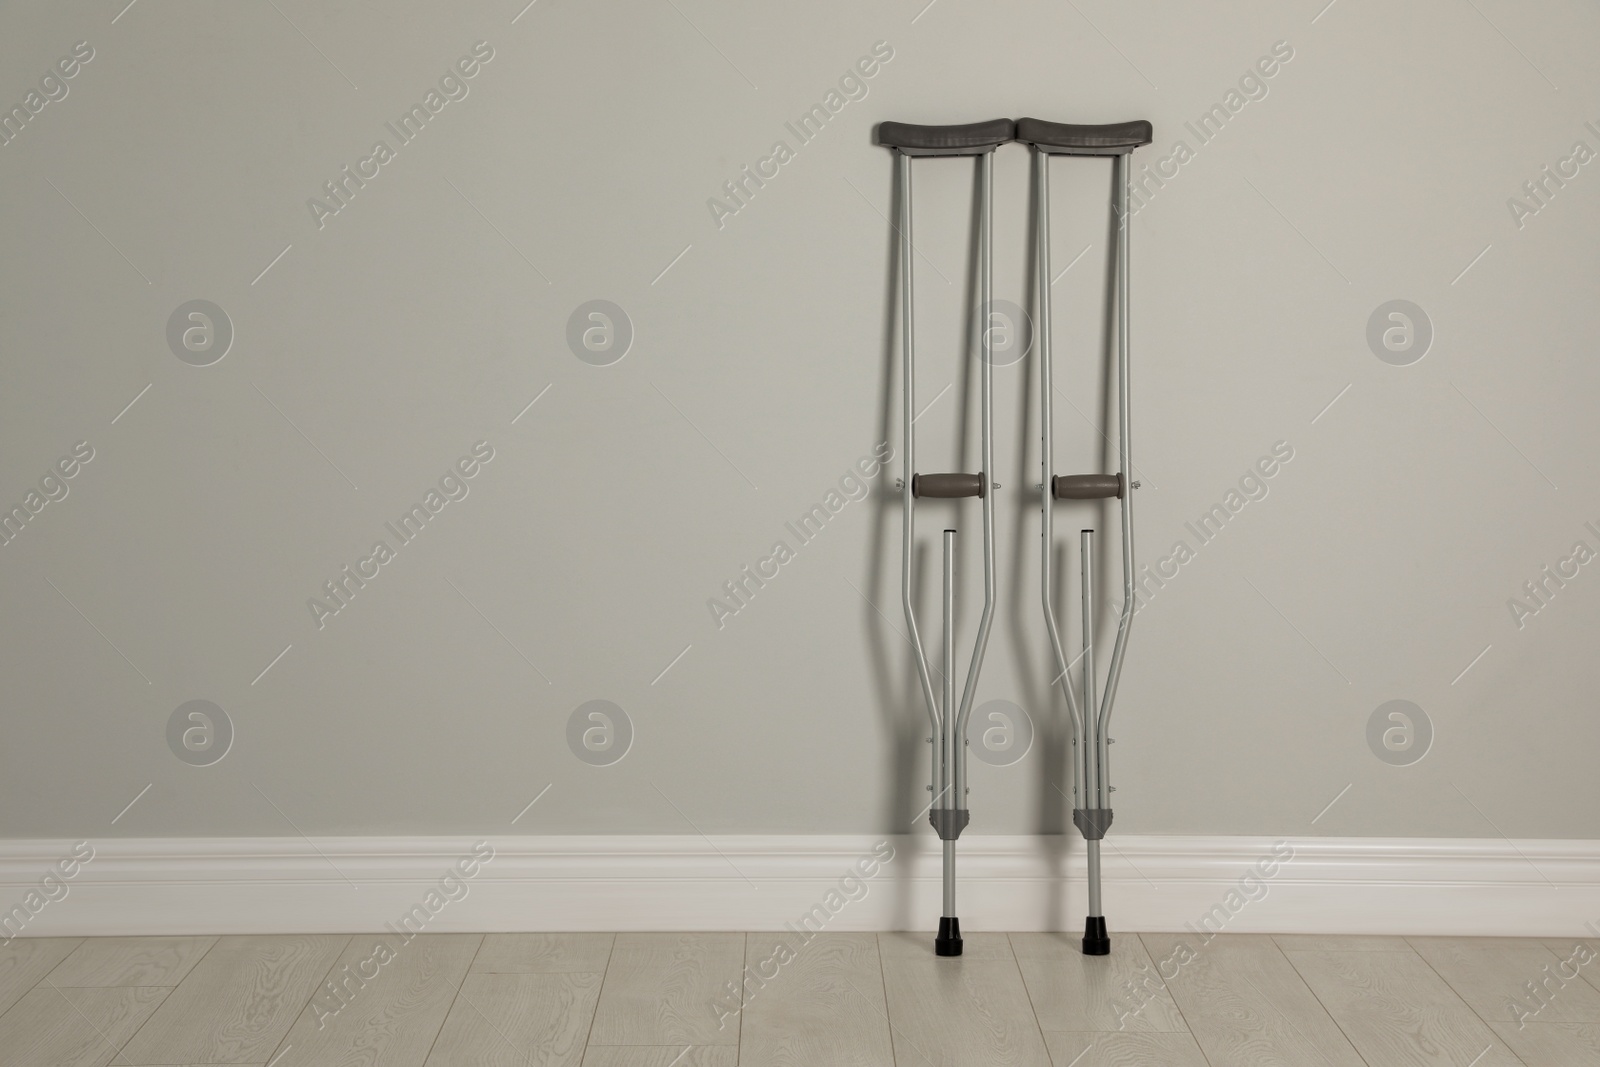 Photo of Pair of axillary crutches near light grey wall. Space for text